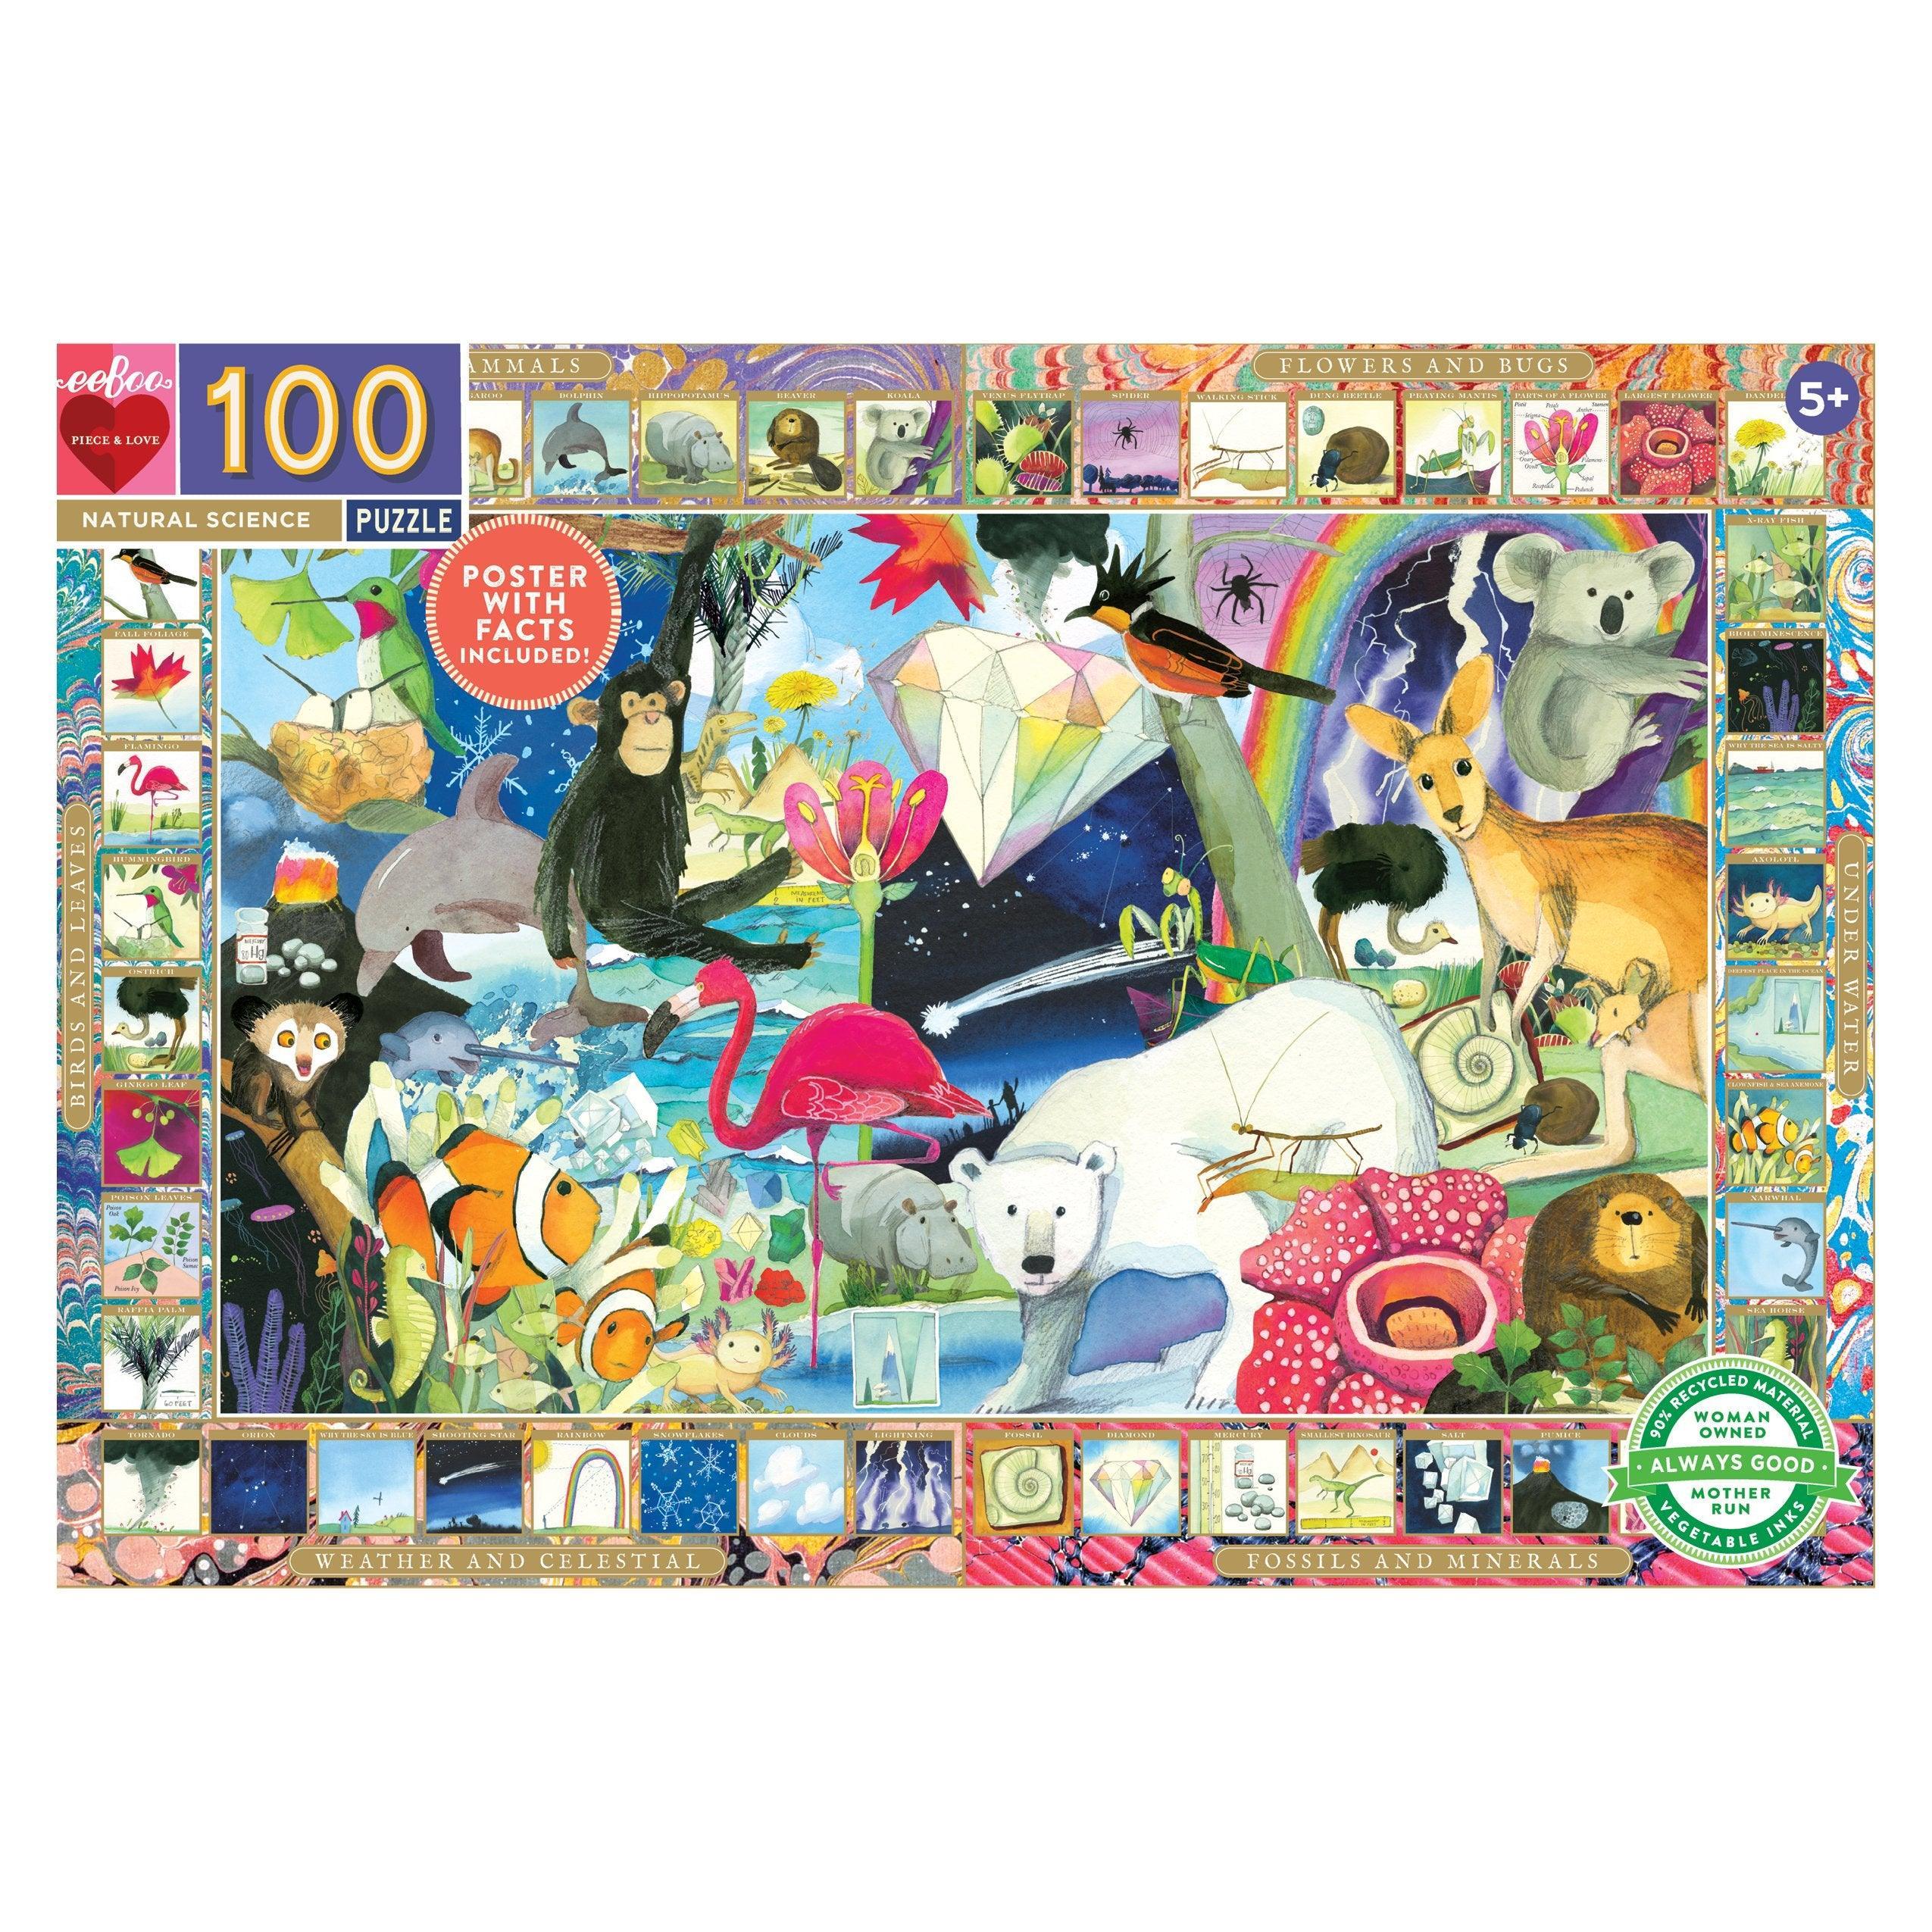 Natural Science 100 Piece puzzle - Why and Whale